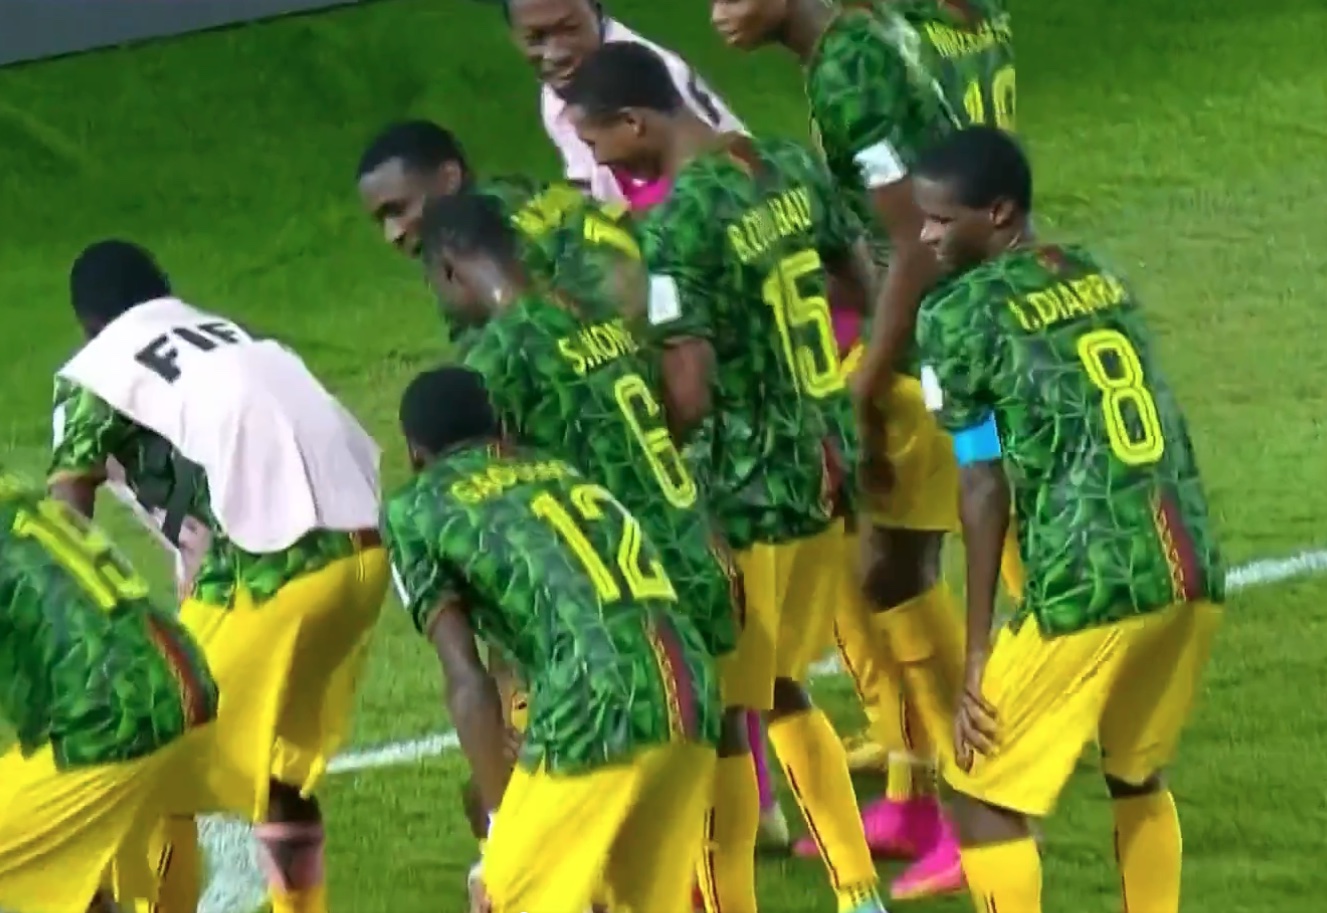 Mali players pictured dancing after scoring a goal in a 3-0 win over Argentina at the U17 World Cup in December 2023